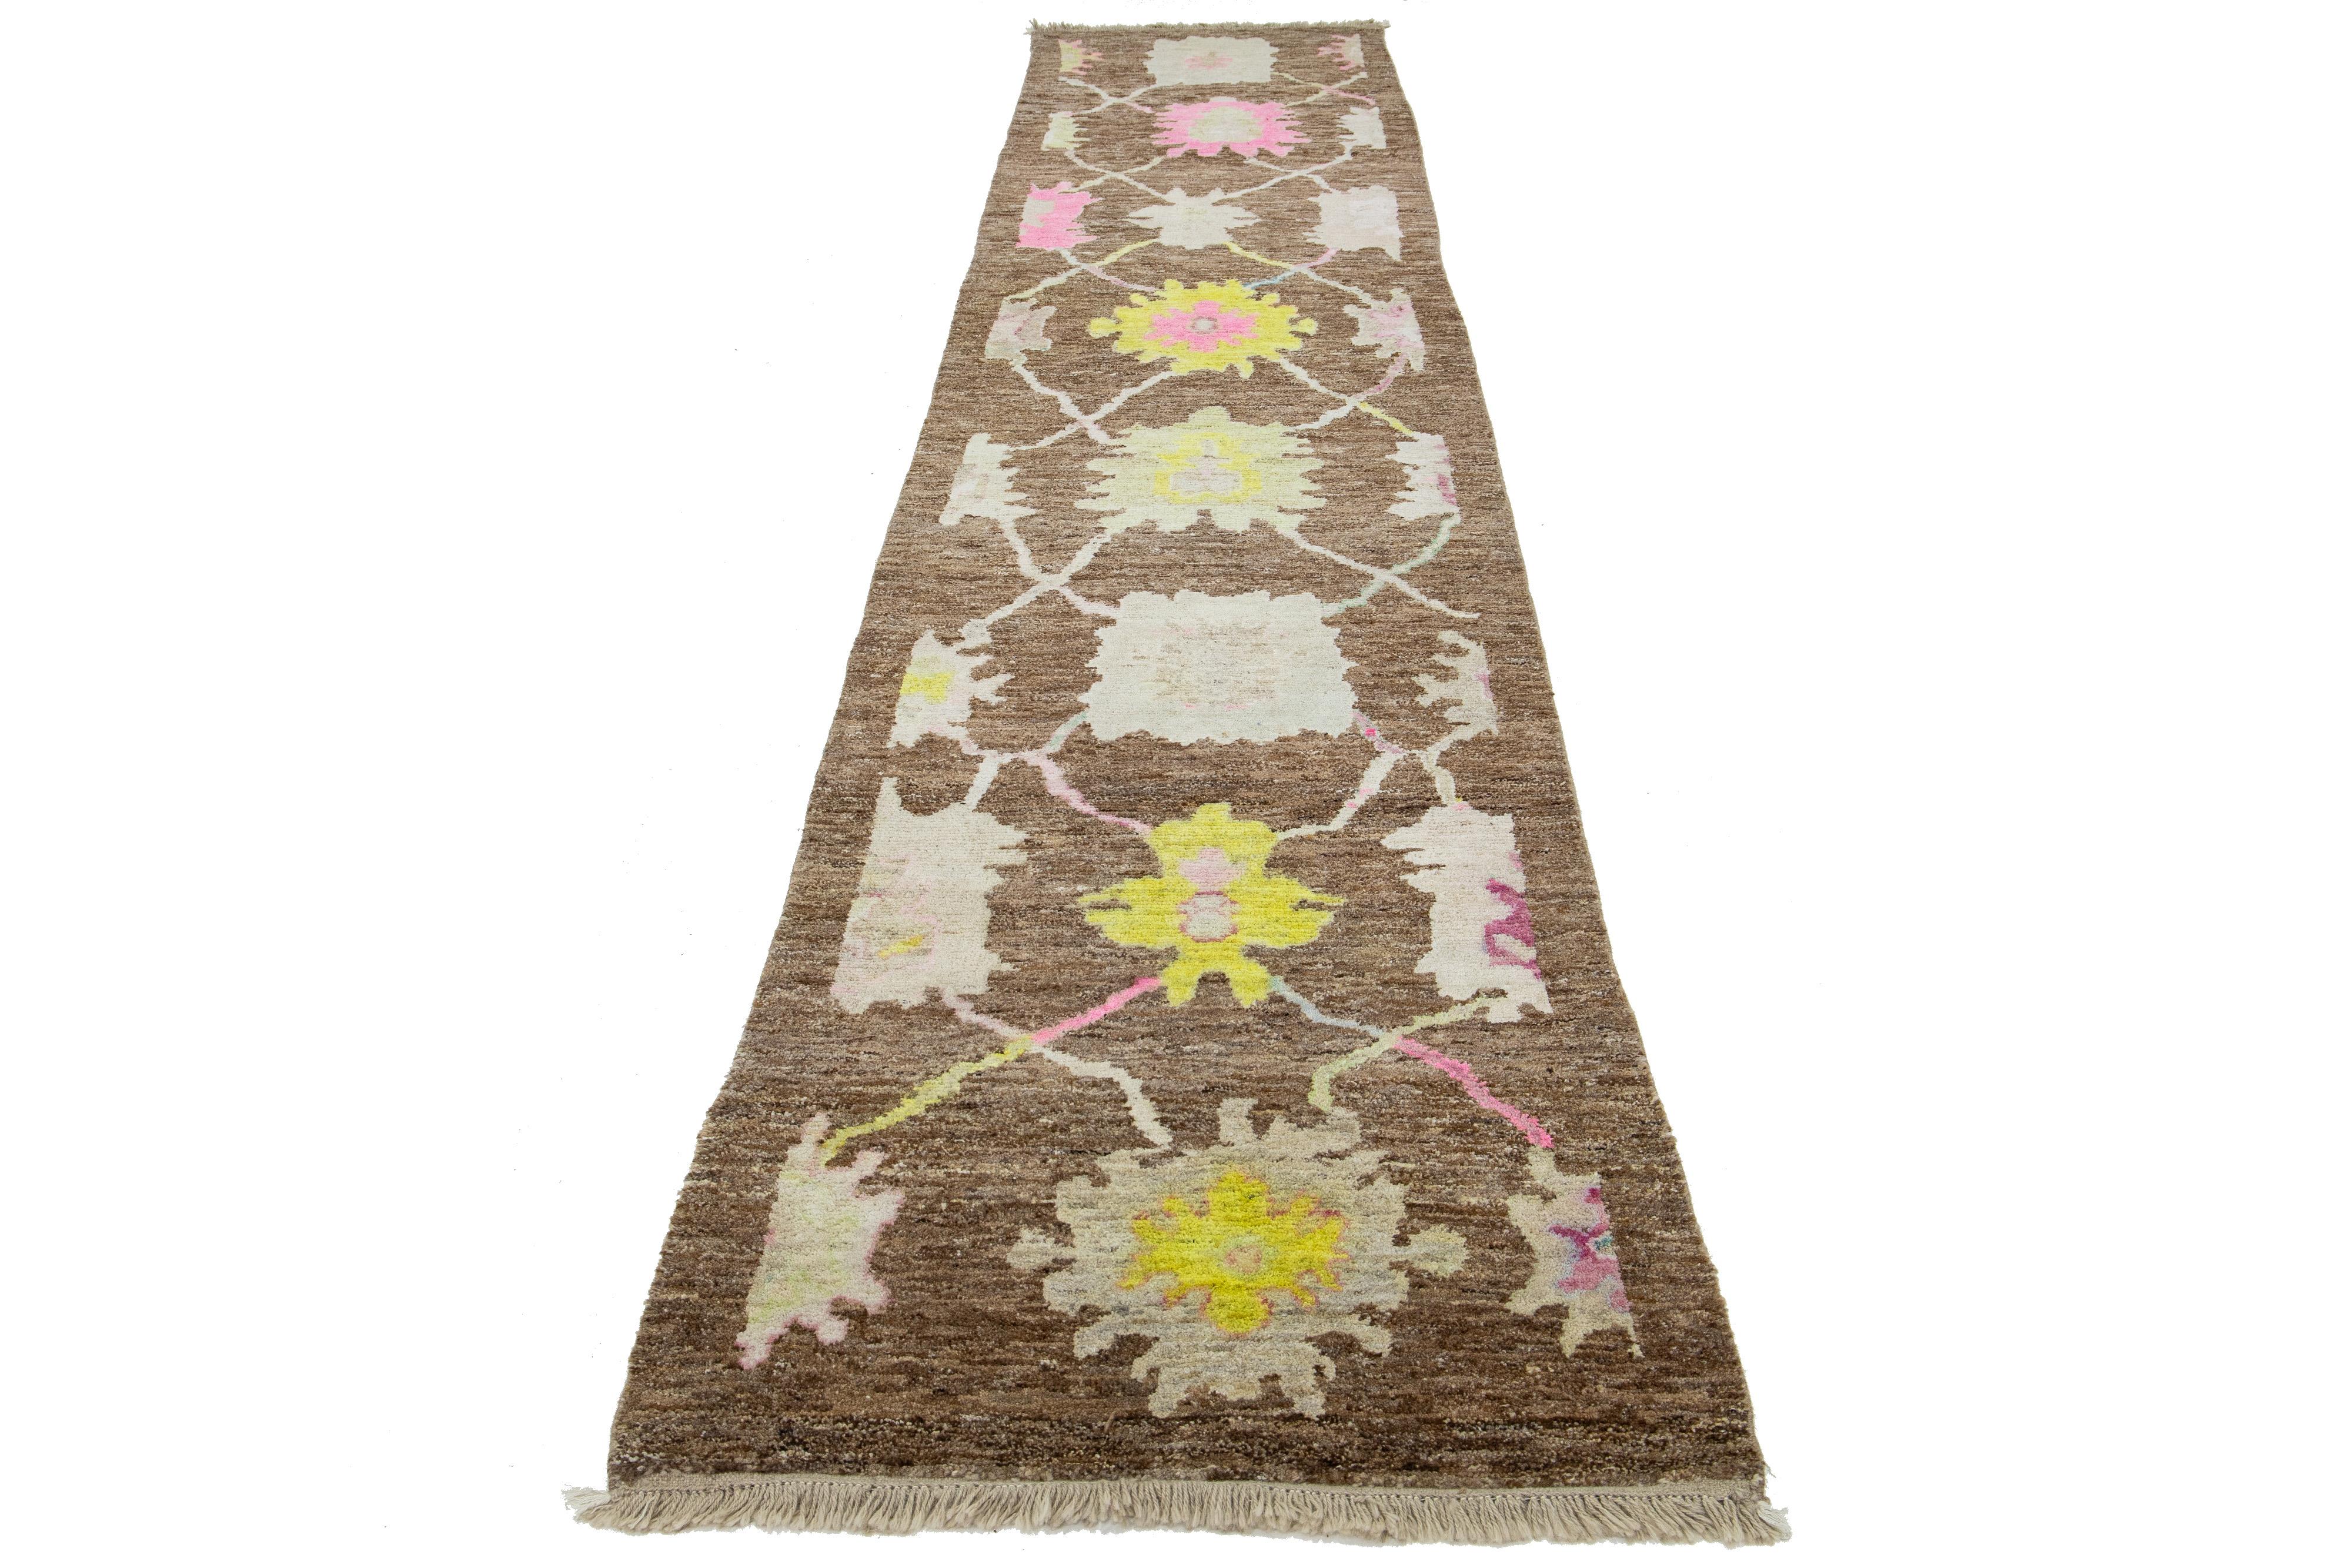 This beautiful modern Oushak hand-knotted wool rug features a brown color field. It is a Turkish piece with stunning accent colors of blue, yellow, pink, and pink, all woven into a gorgeous all-over floral design.

This rug measures 3'1